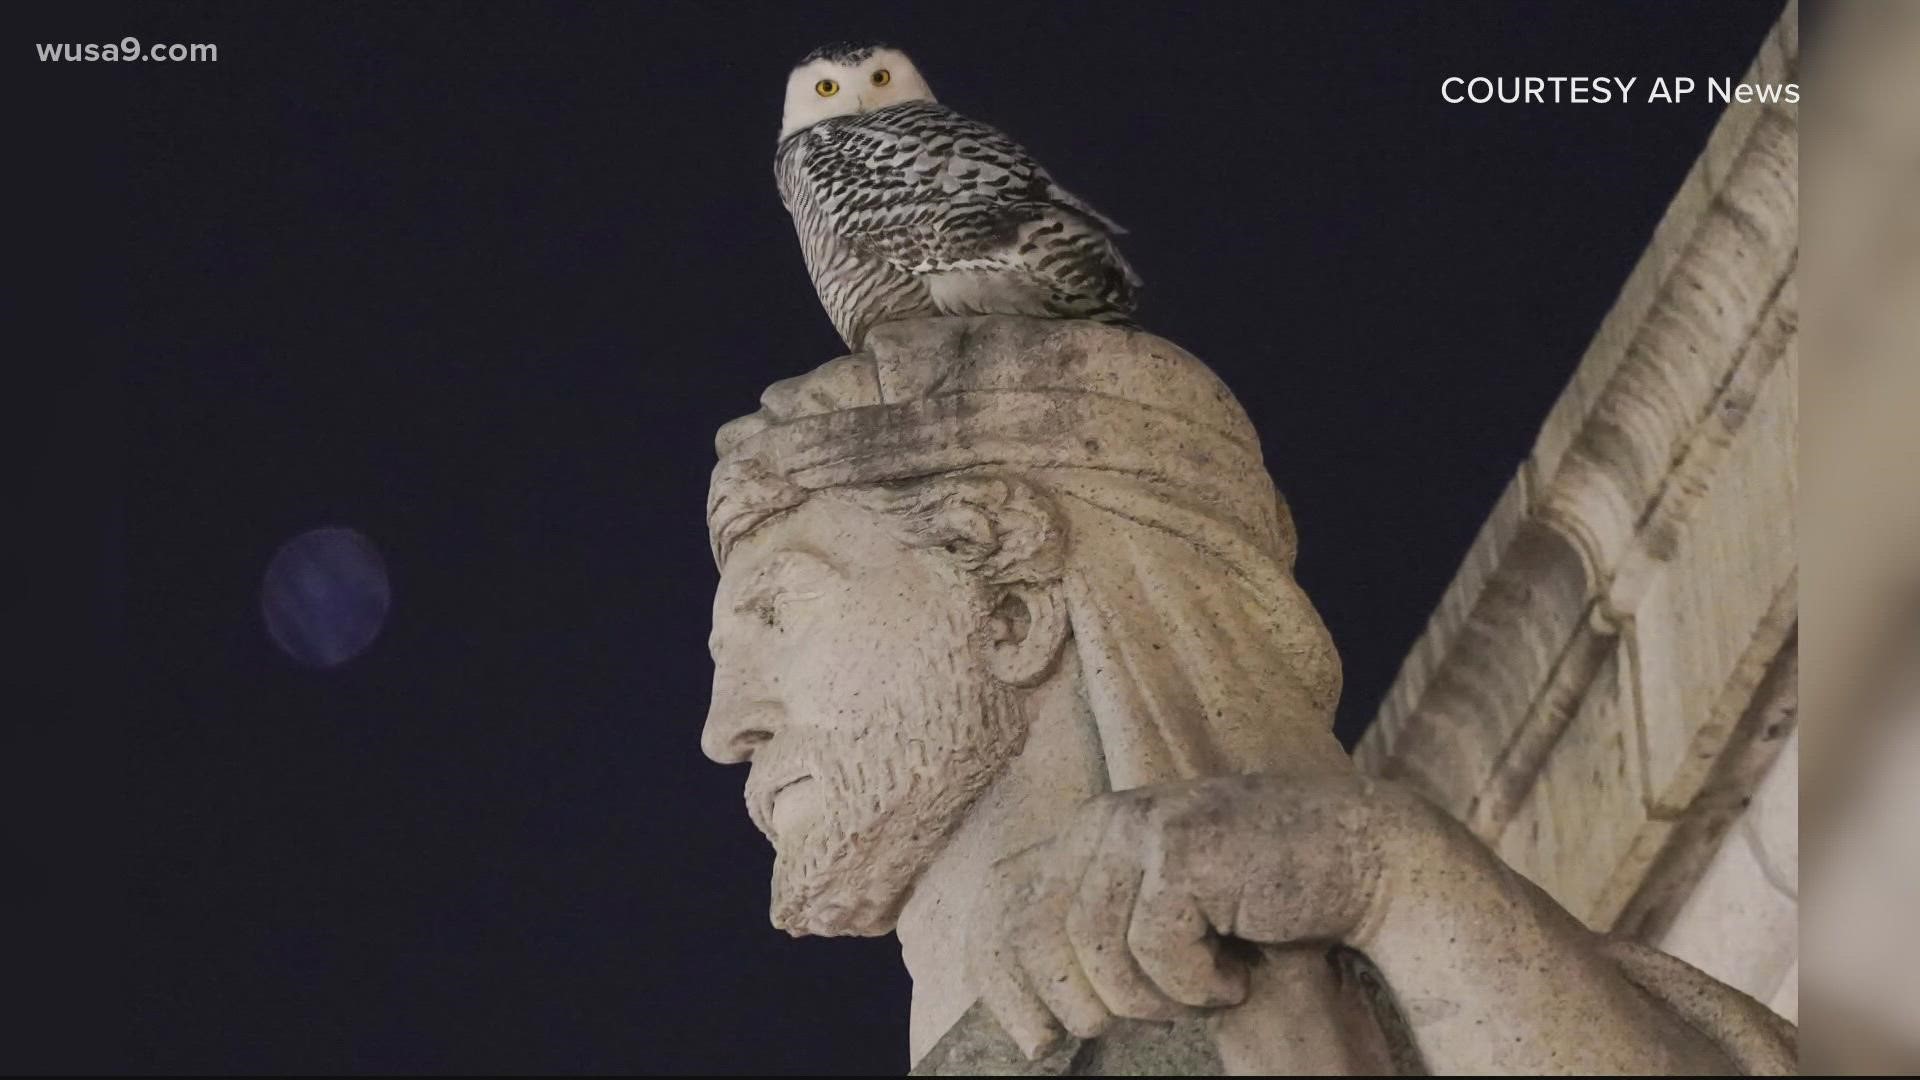 The owl was first spotted on DC on January 3.